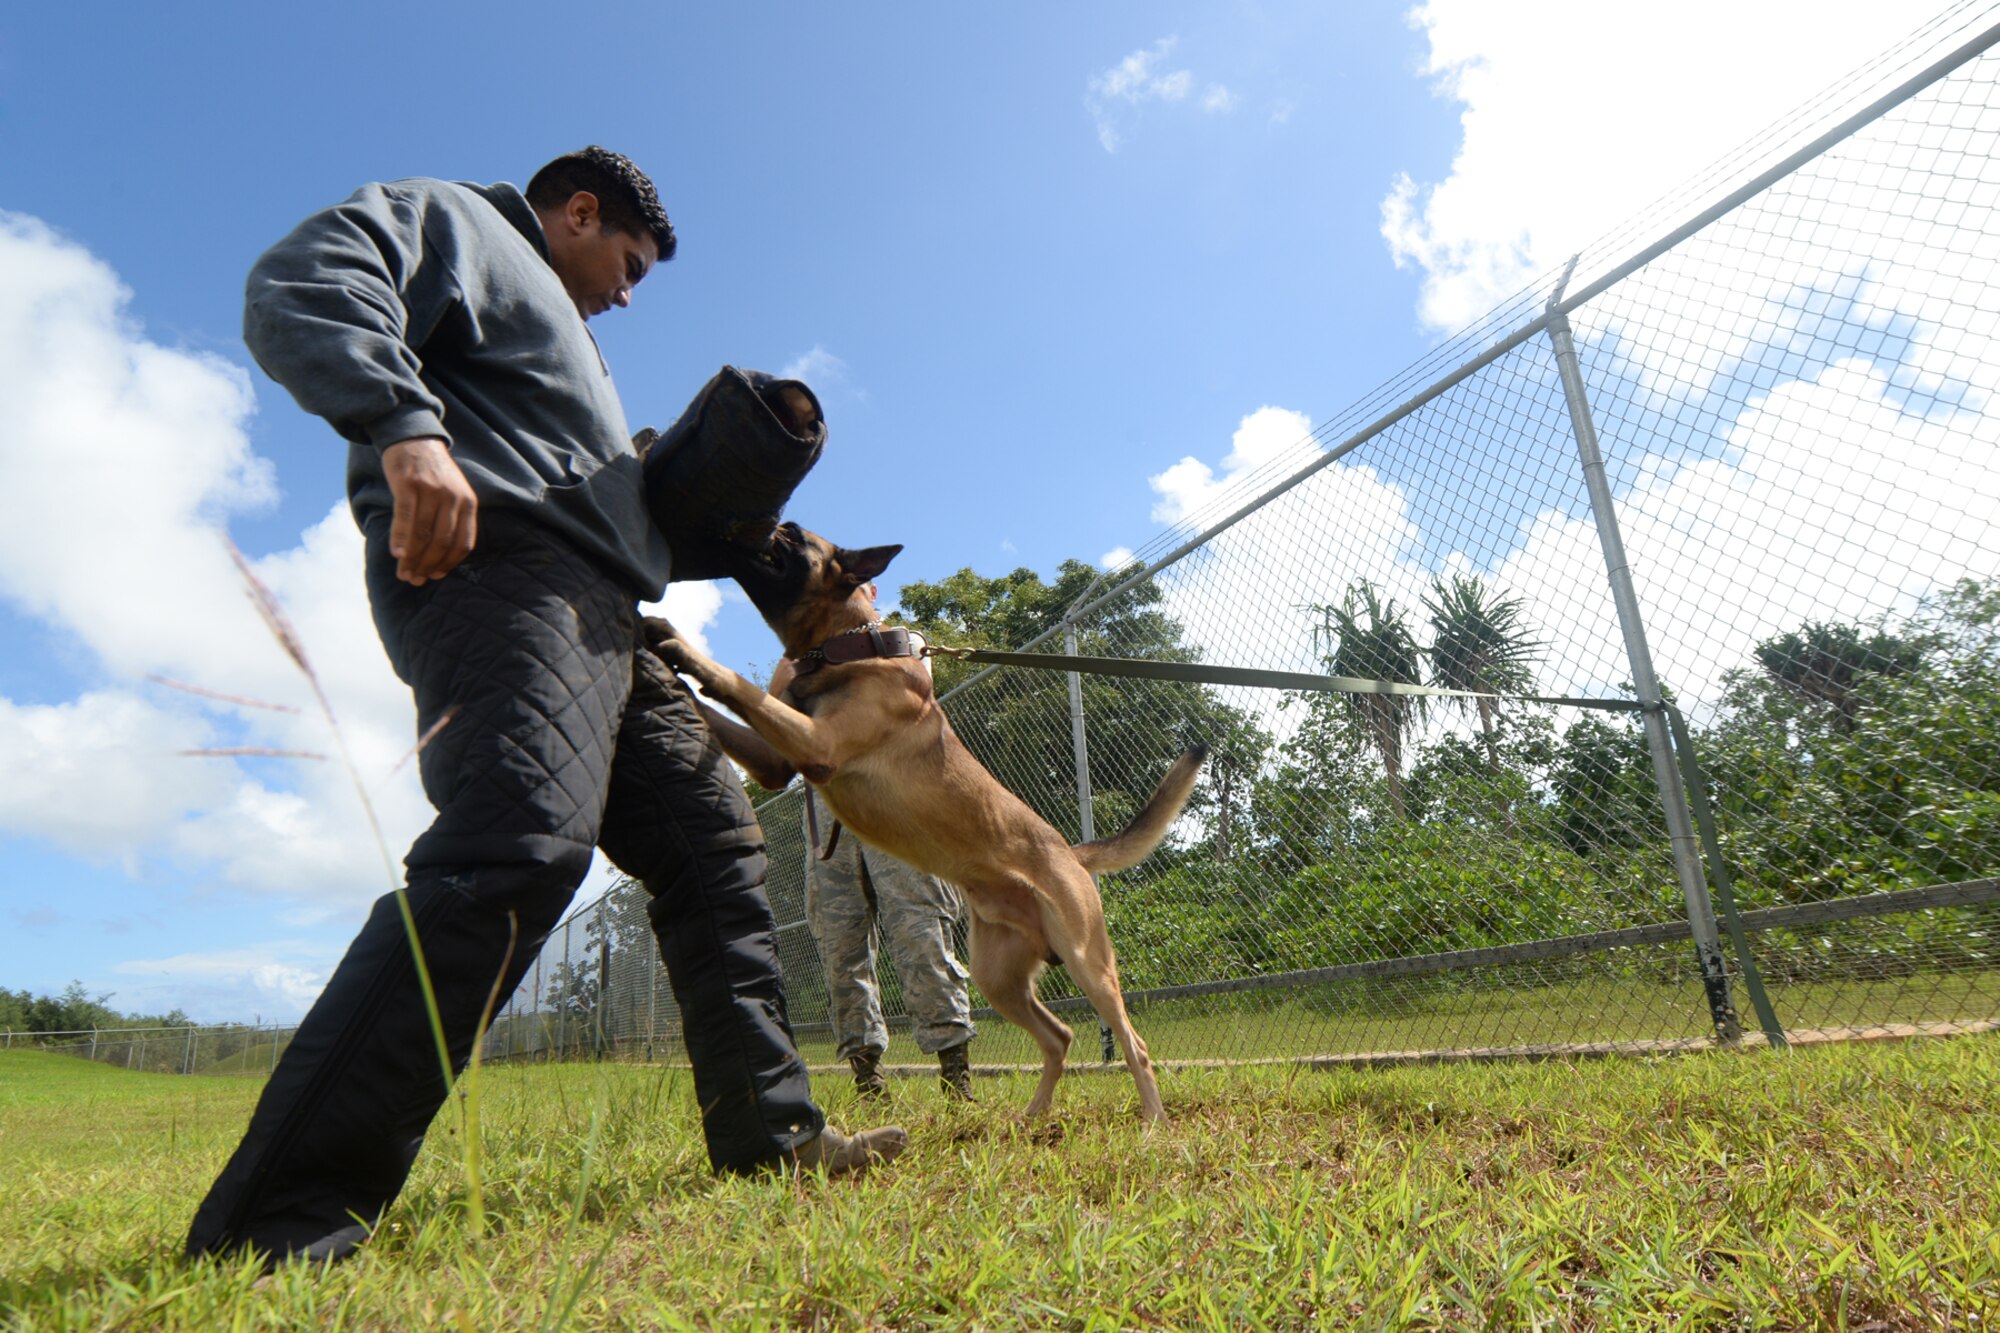 Staff Sgt. Adrian Chavez, a 36th Security Forces Squadron dog trainer, and military working dog Ramos conduct patrol training together Oct. 28, 2015, at Andersen Air Force Base, Guam. Patrol training is an essential part of training for patrol dogs to be able to protect personnel and assets. (U.S. Air Force photo/Airman 1st Class Alexa Ann Henderson)